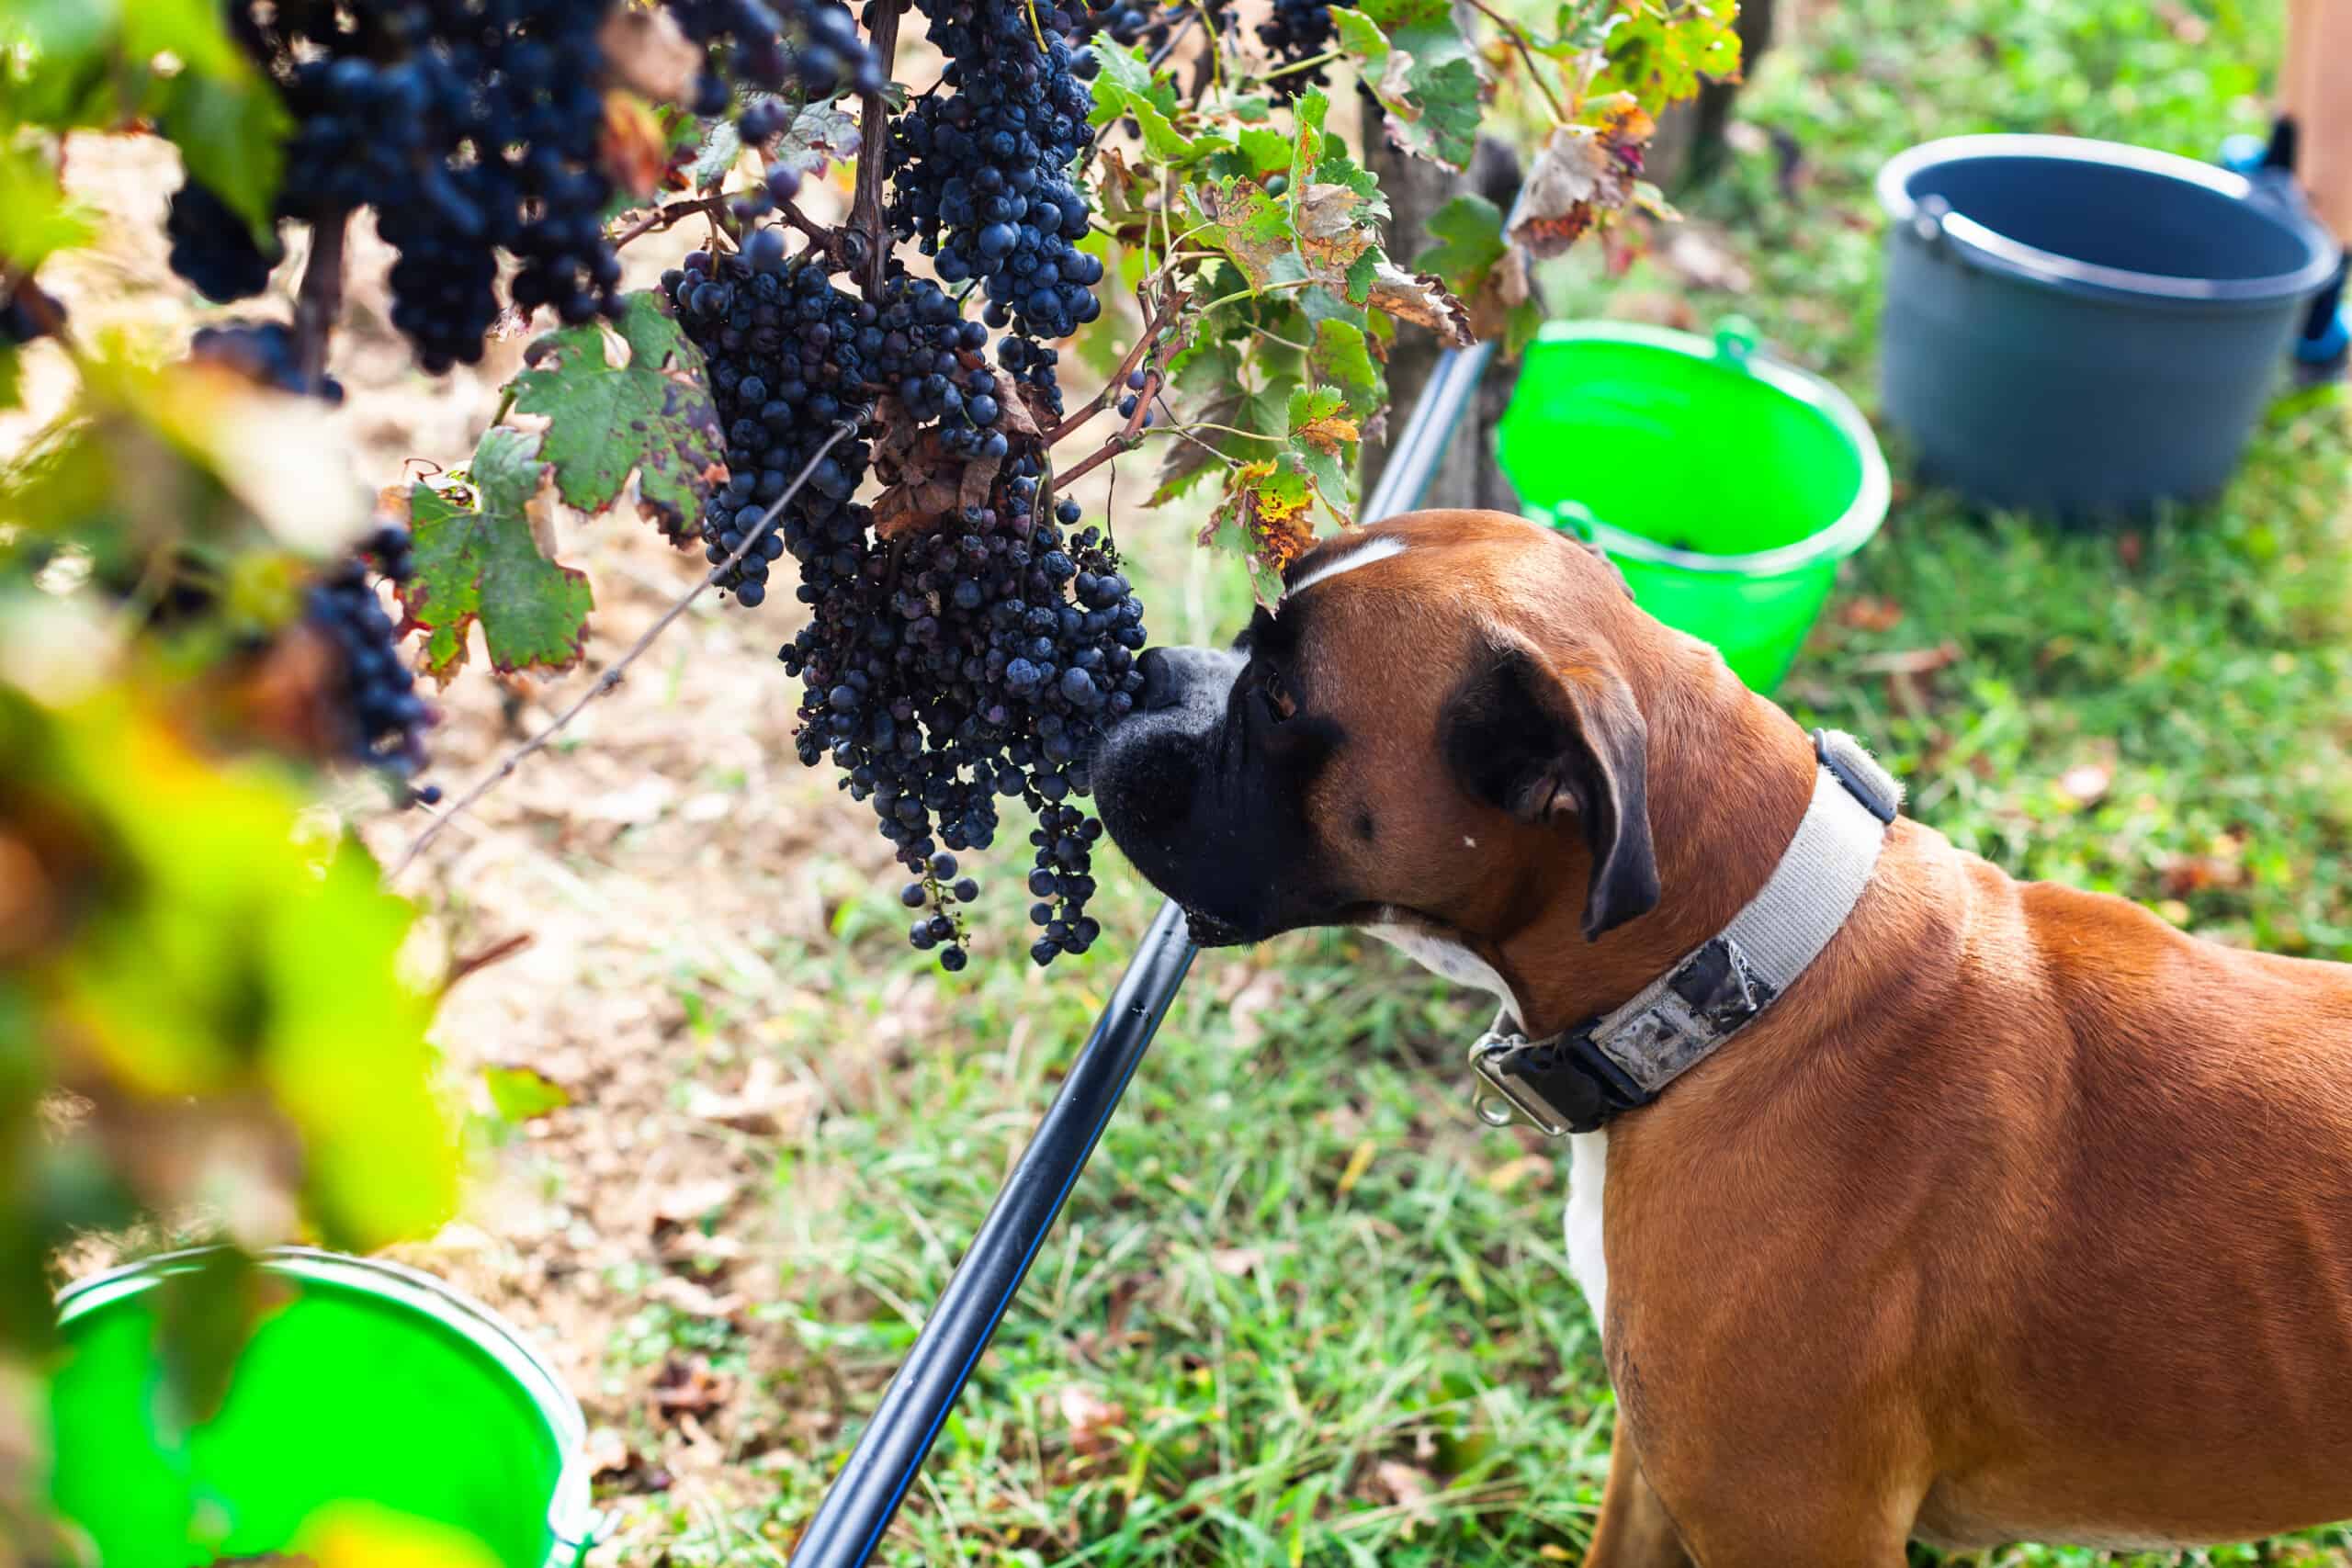 oxer sniffing grapes at a winery